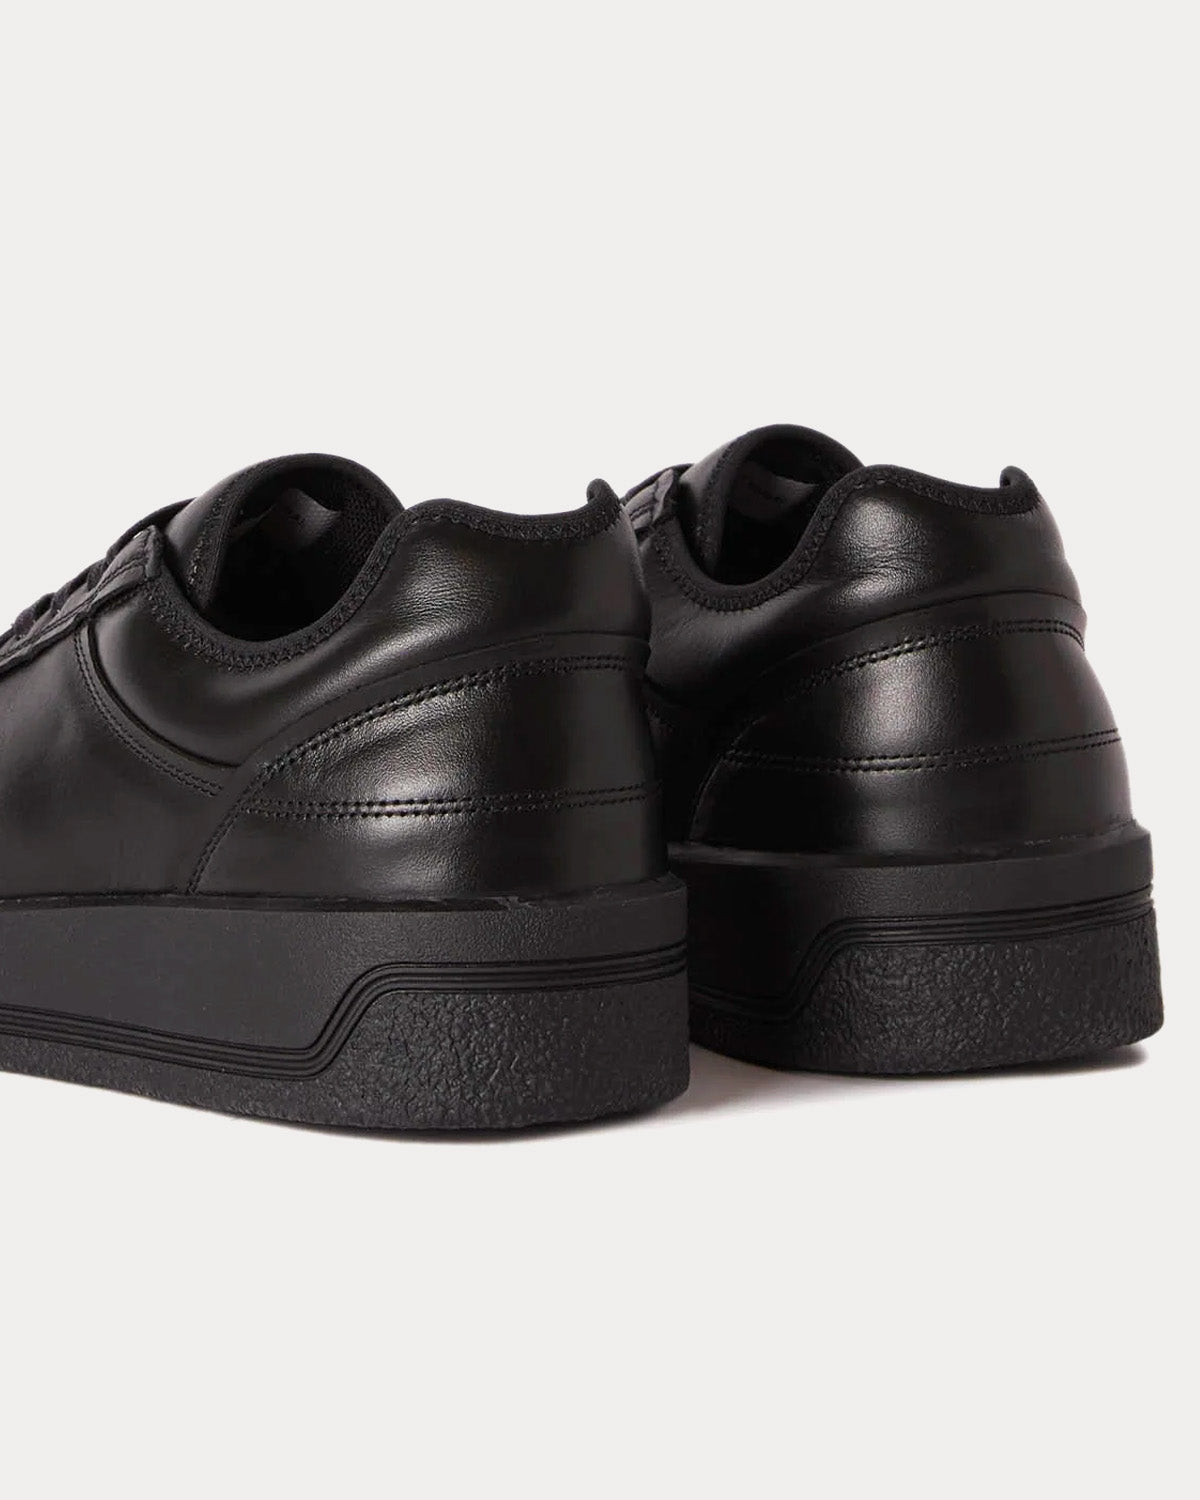 OAMC - Cosmos Cupsole Black Low Top Sneakers